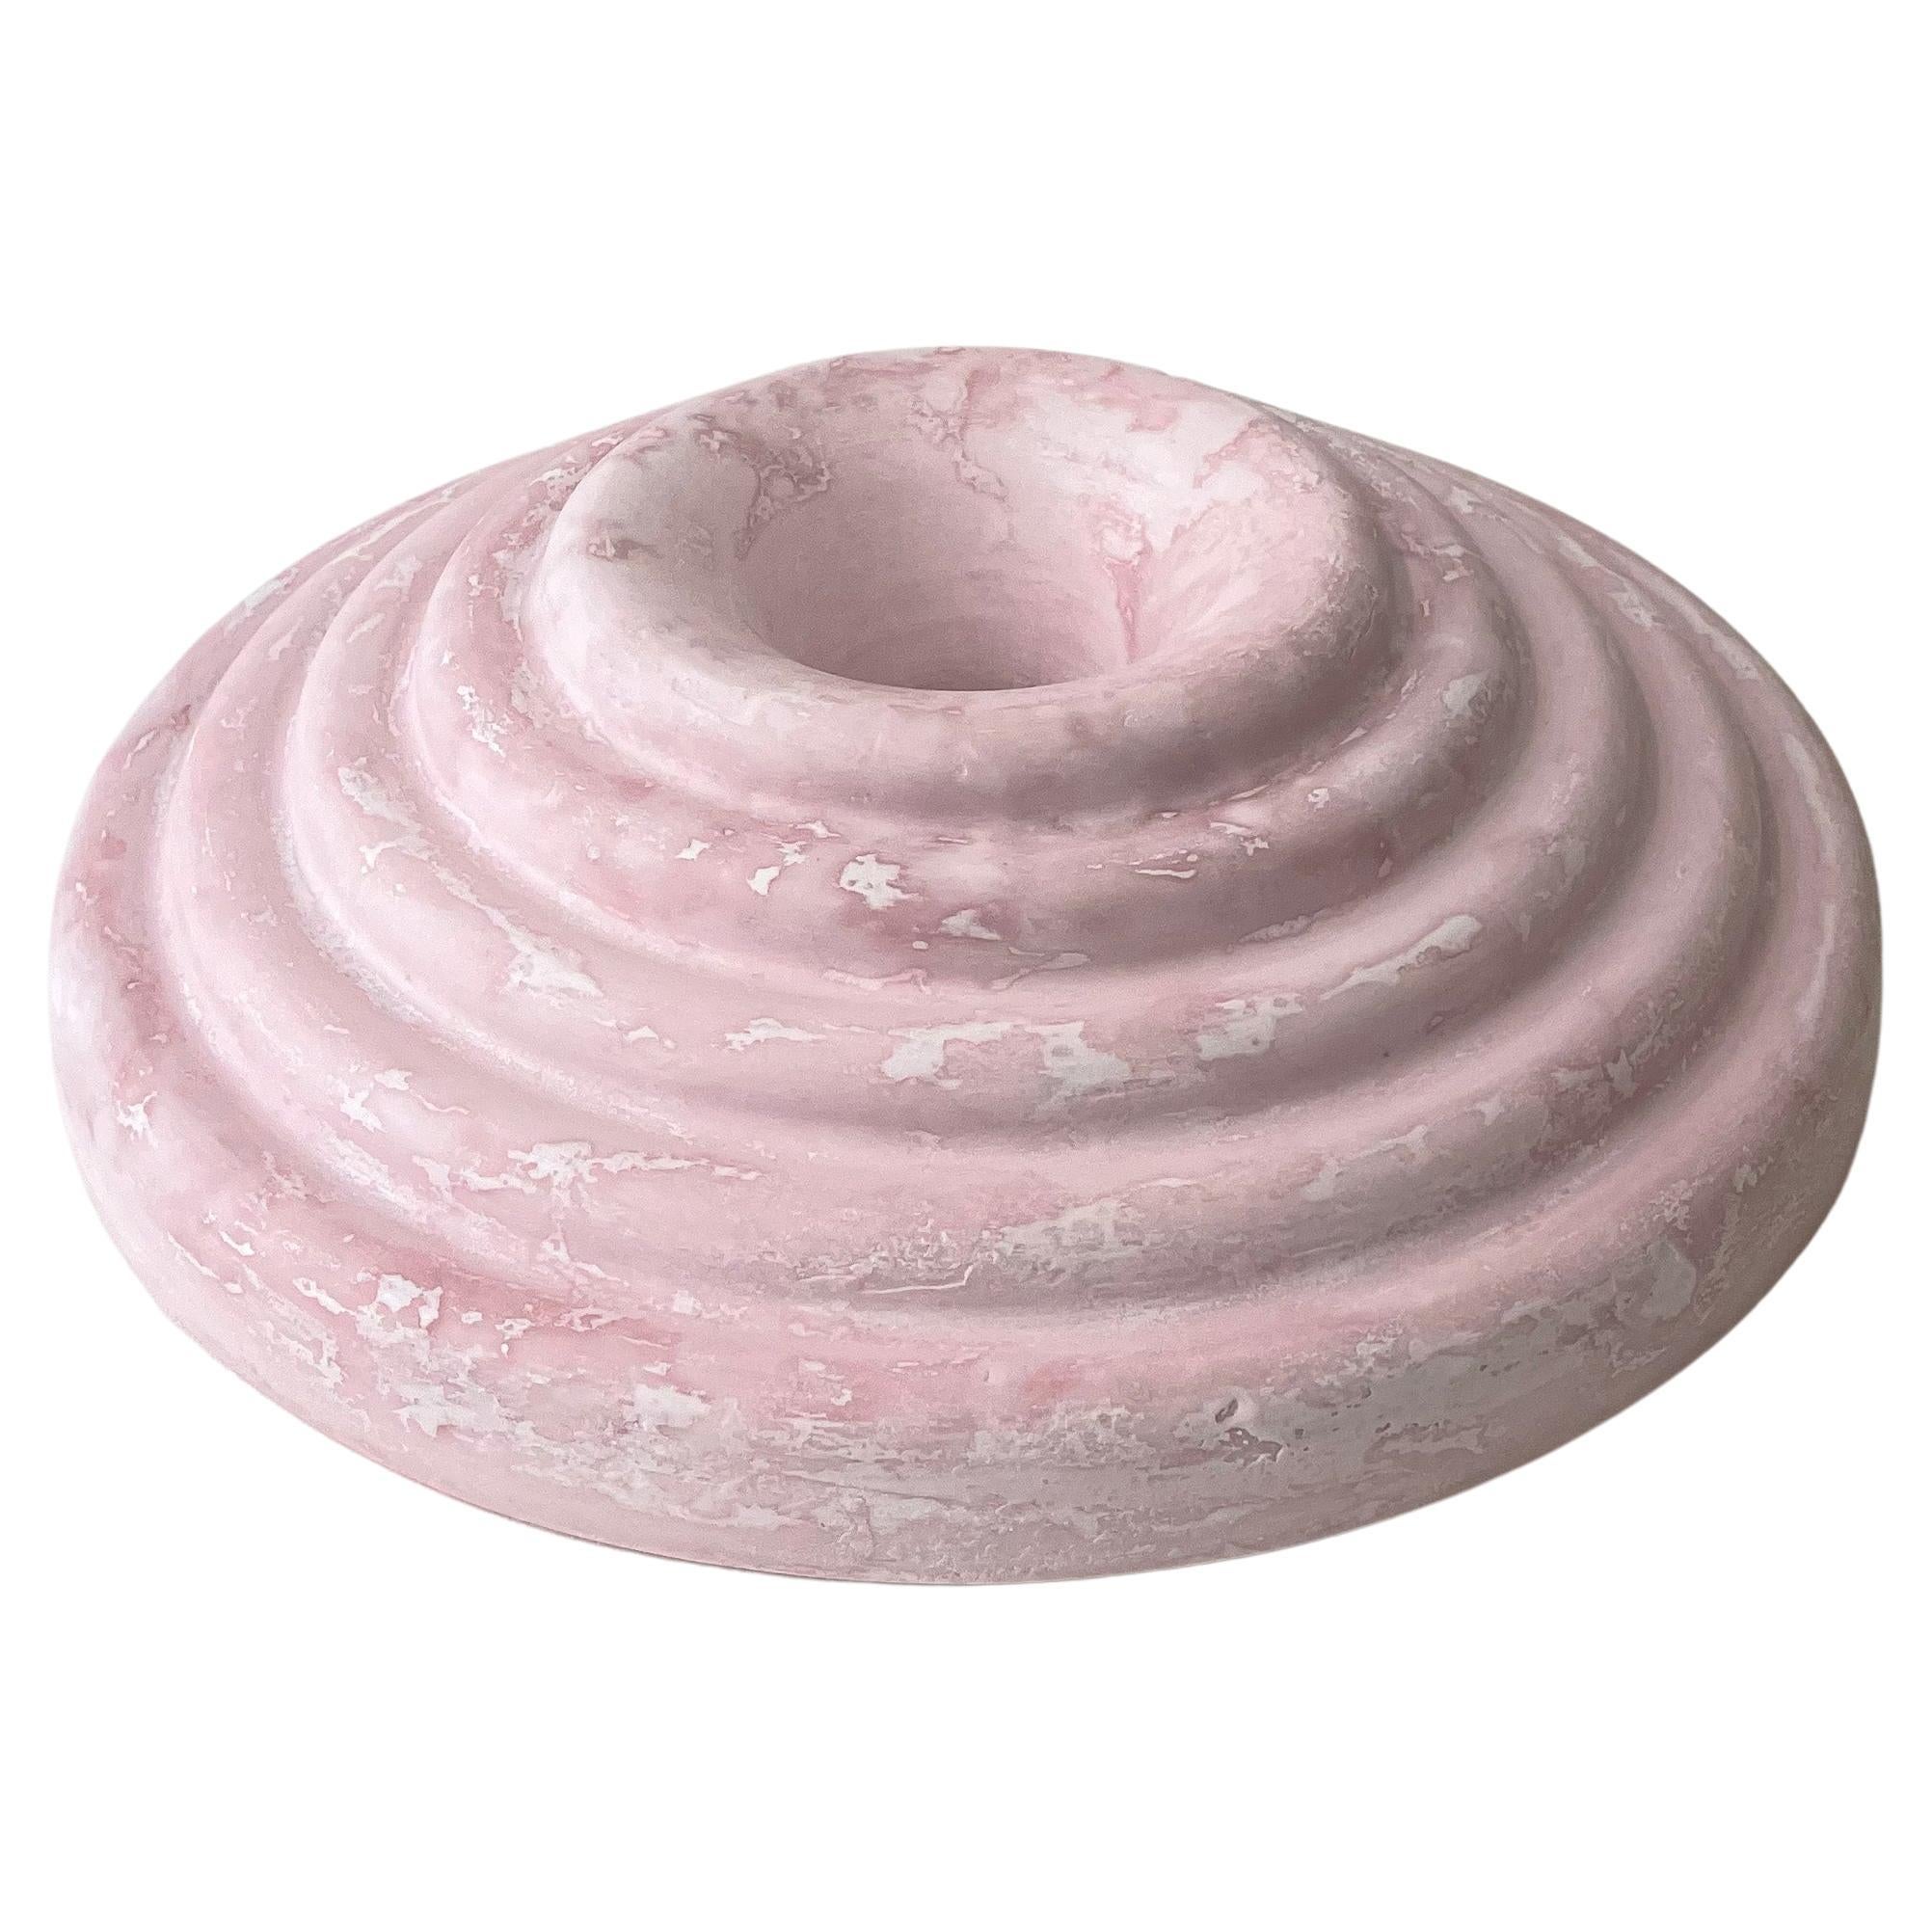 Twirl Bowl, Pearl Pink

Production: Made to order, Other designs can be made on request.

Material: Alpha crystalline gypsum (Hard plaster)
Finish: Glossy coating
Inside Finish: Glossy coating

Twirl Bowls is a Collection of sculptural bowls made by